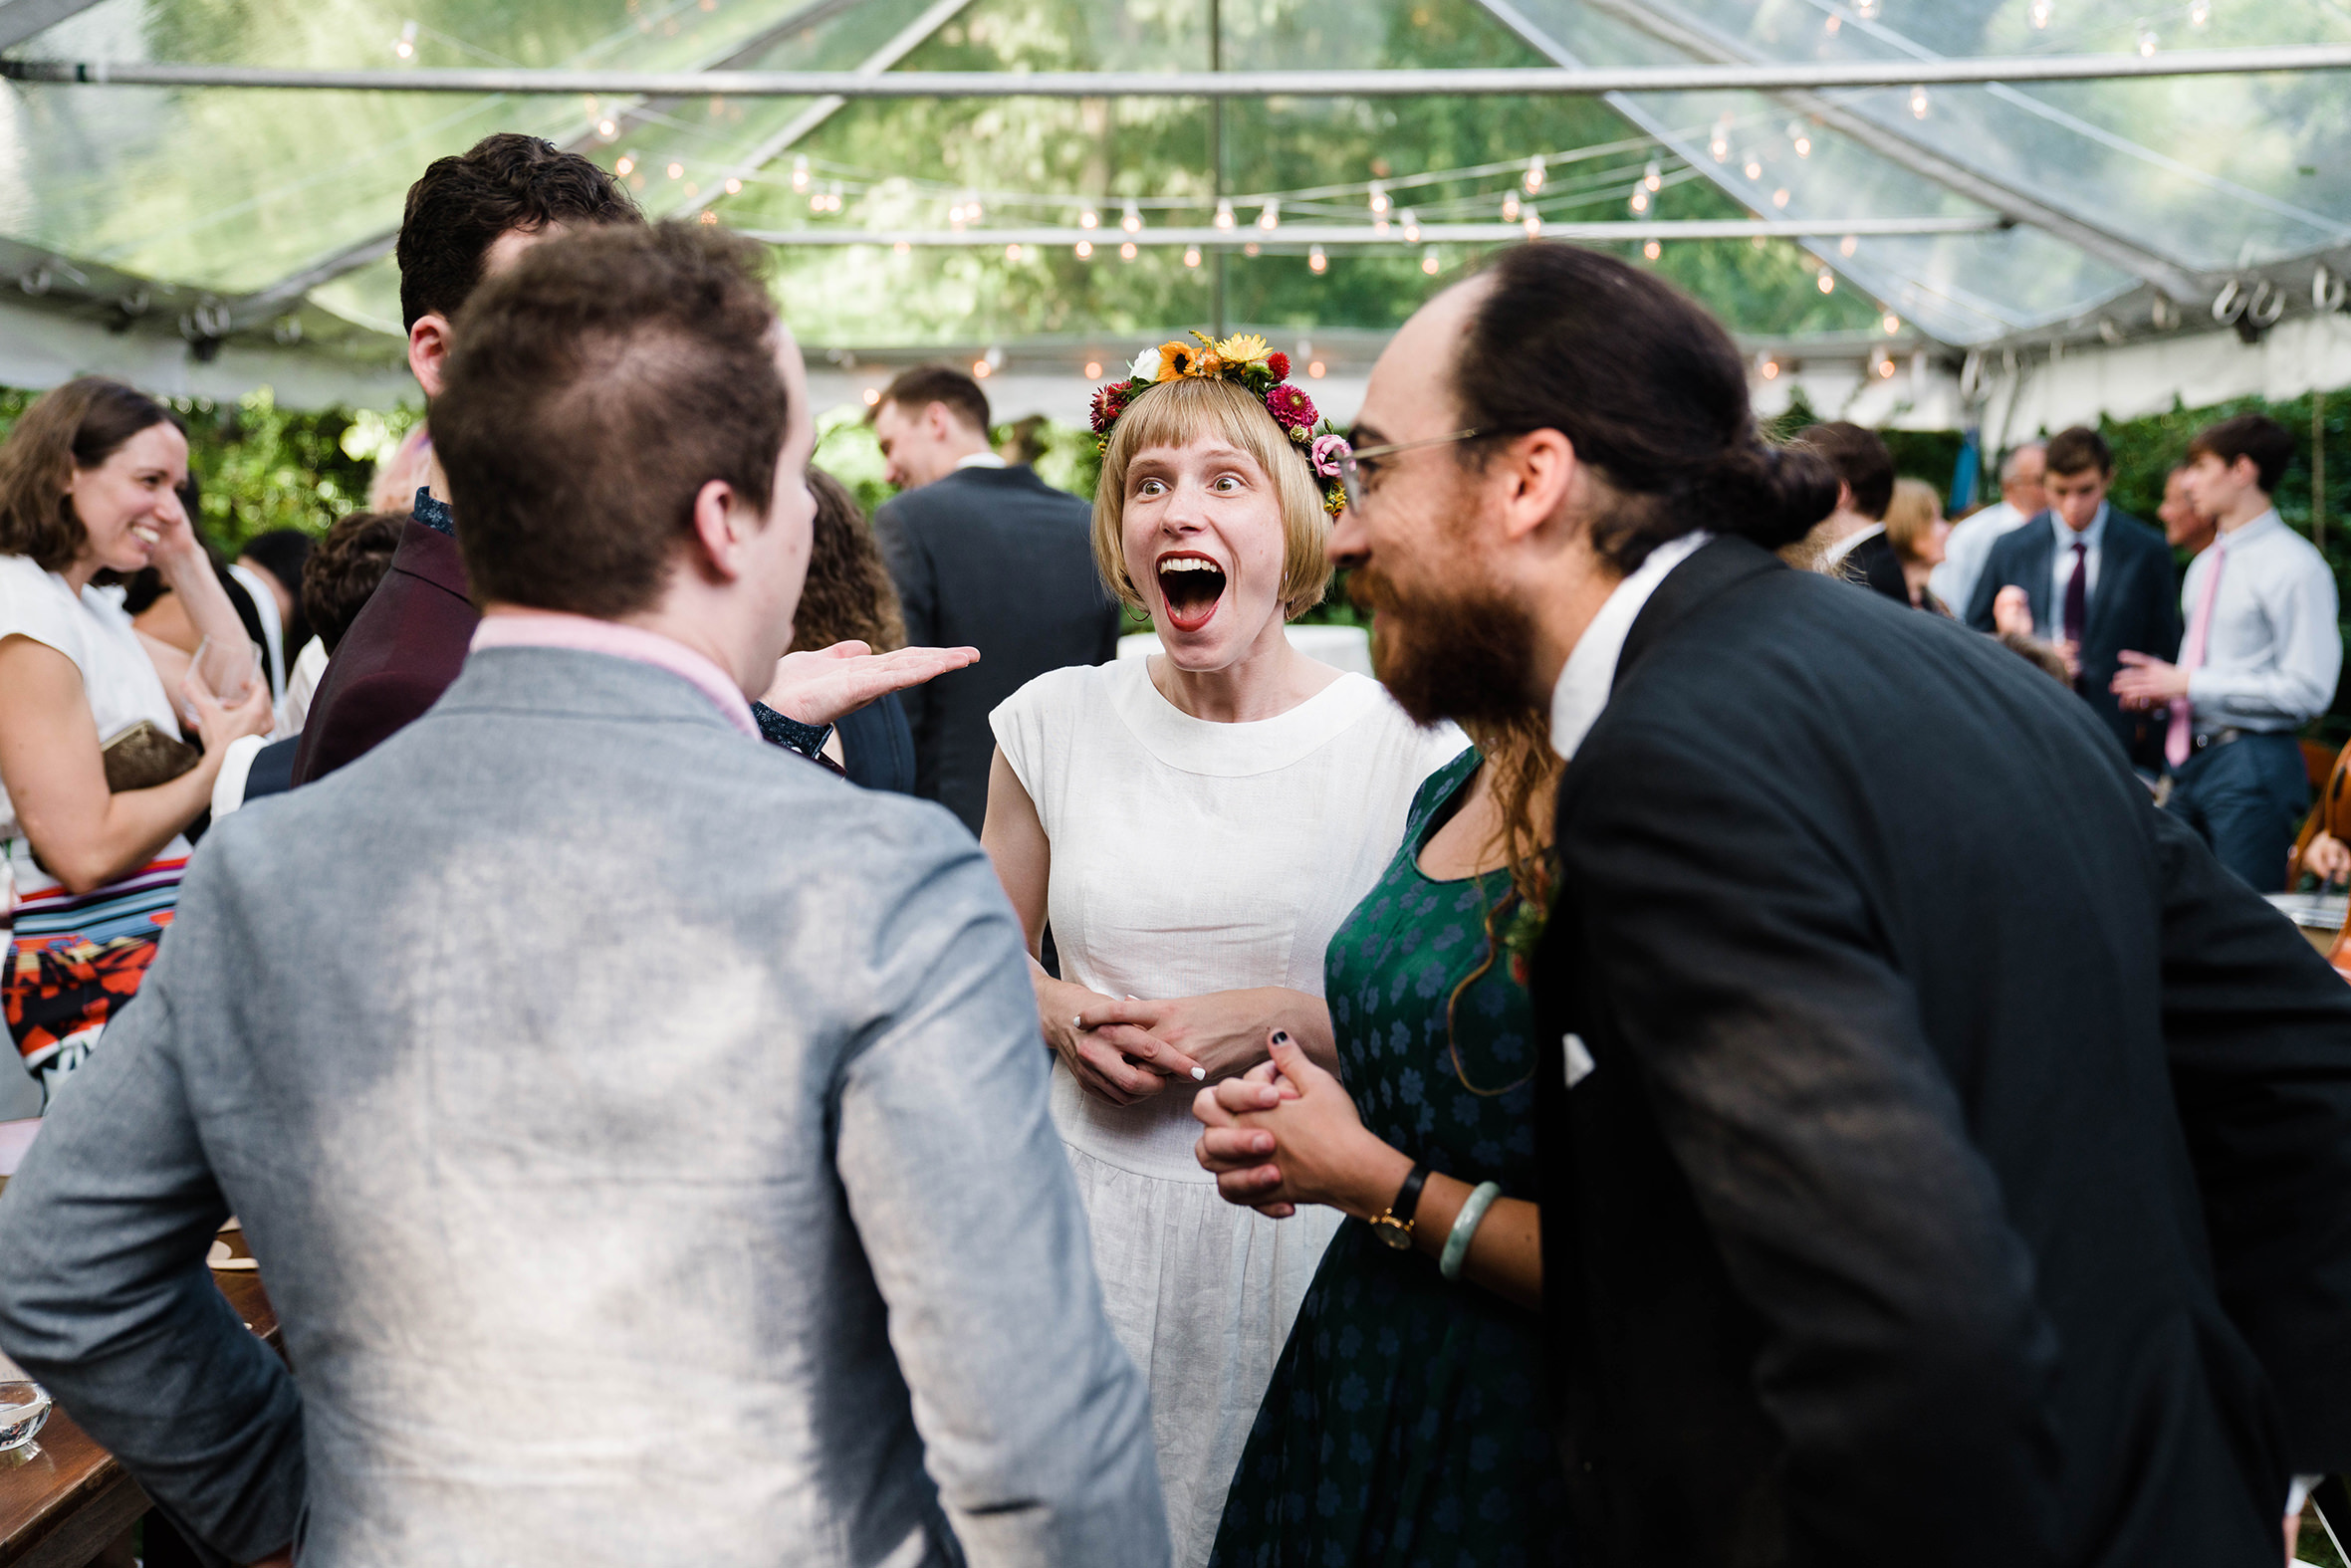 A documentary photograph featured in the best of wedding photography of 2019 showing a bride talking and laughing with friends during cocktail hour